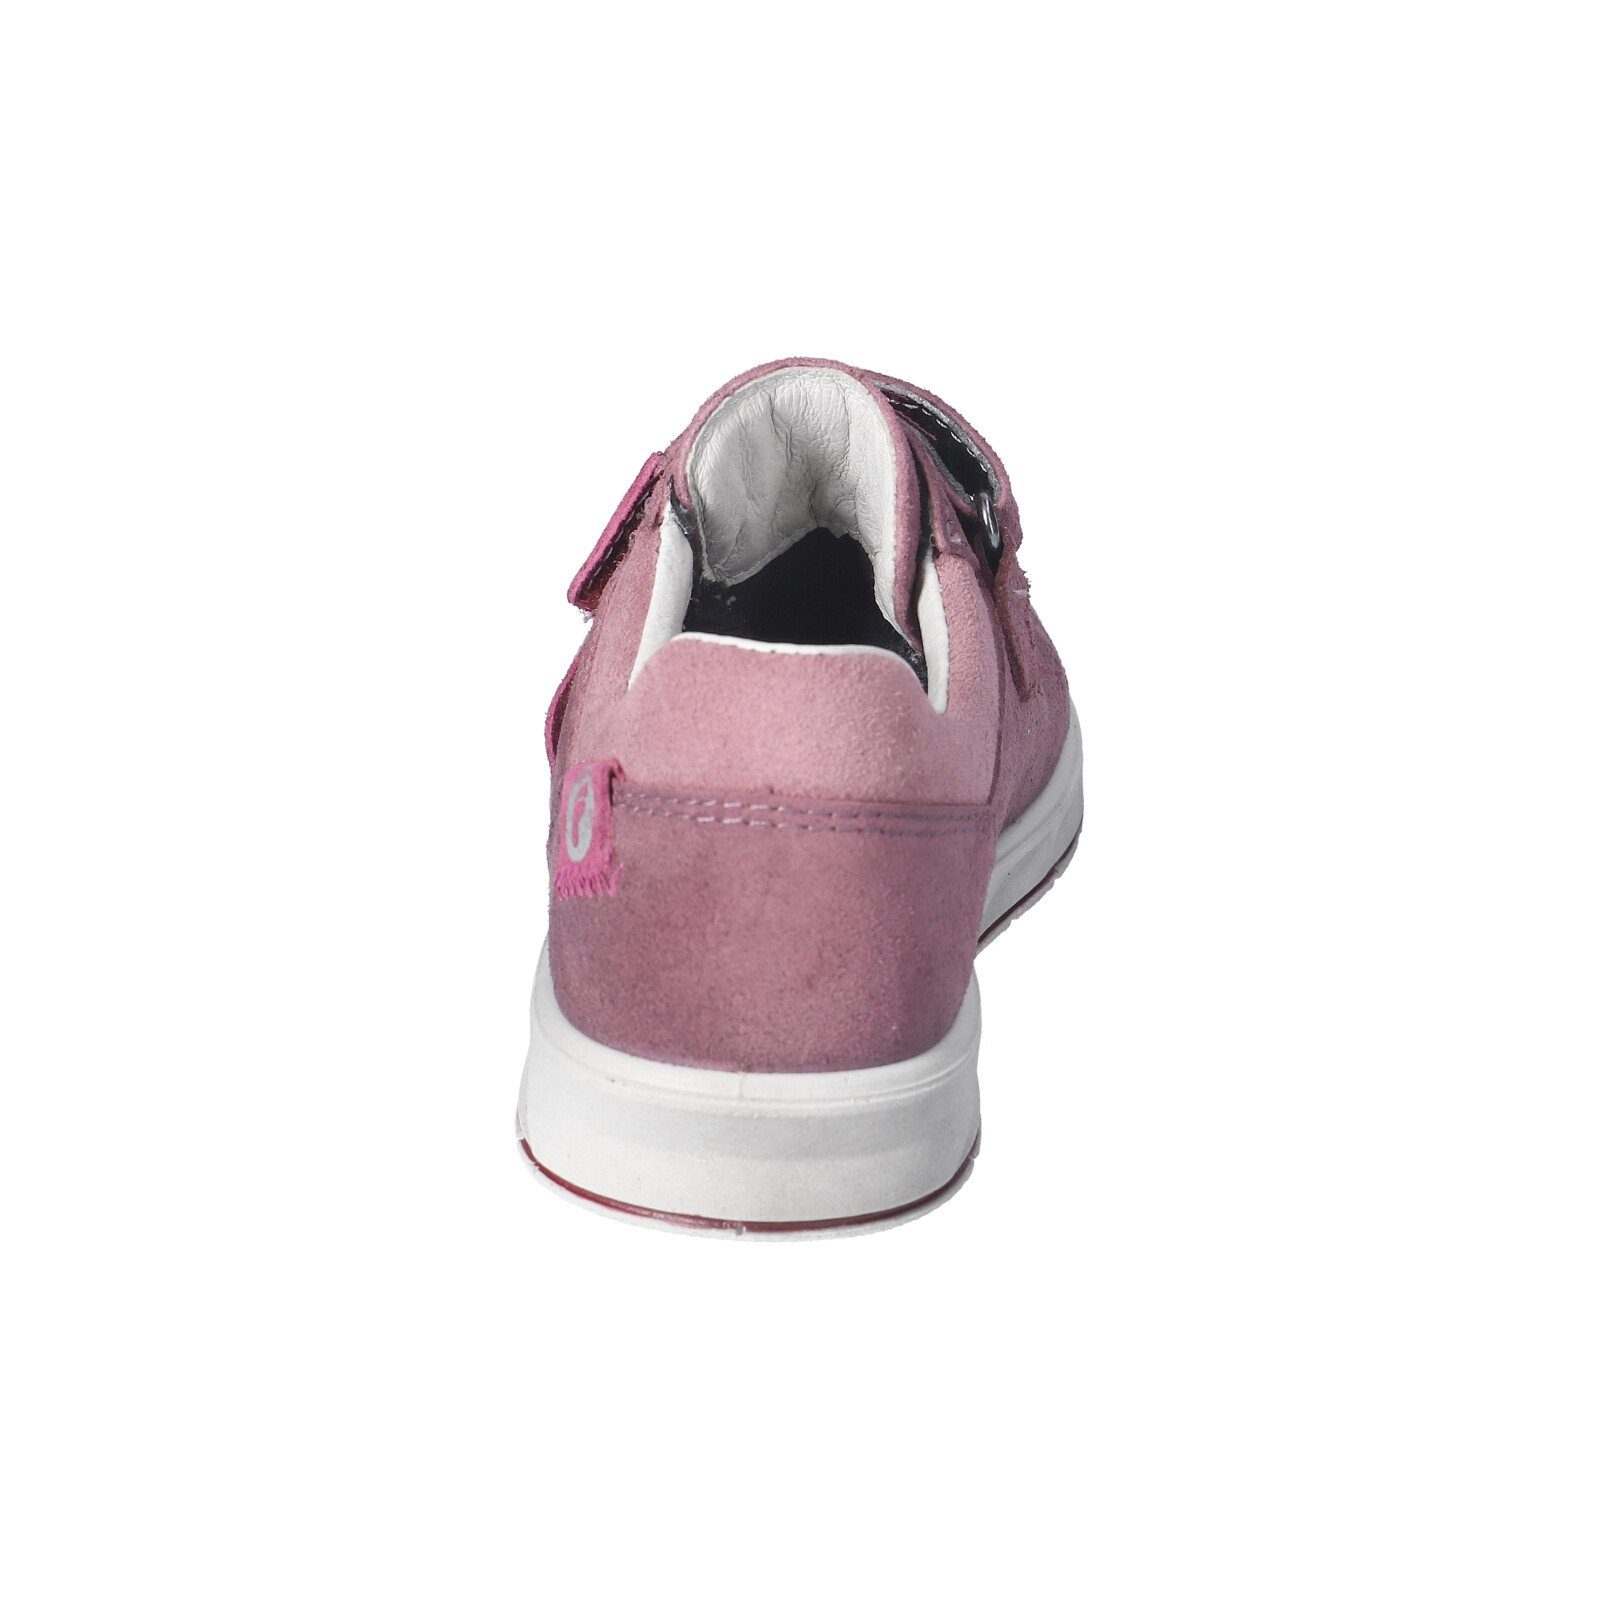 Ricosta Sneaker pflaume/sucre (370)